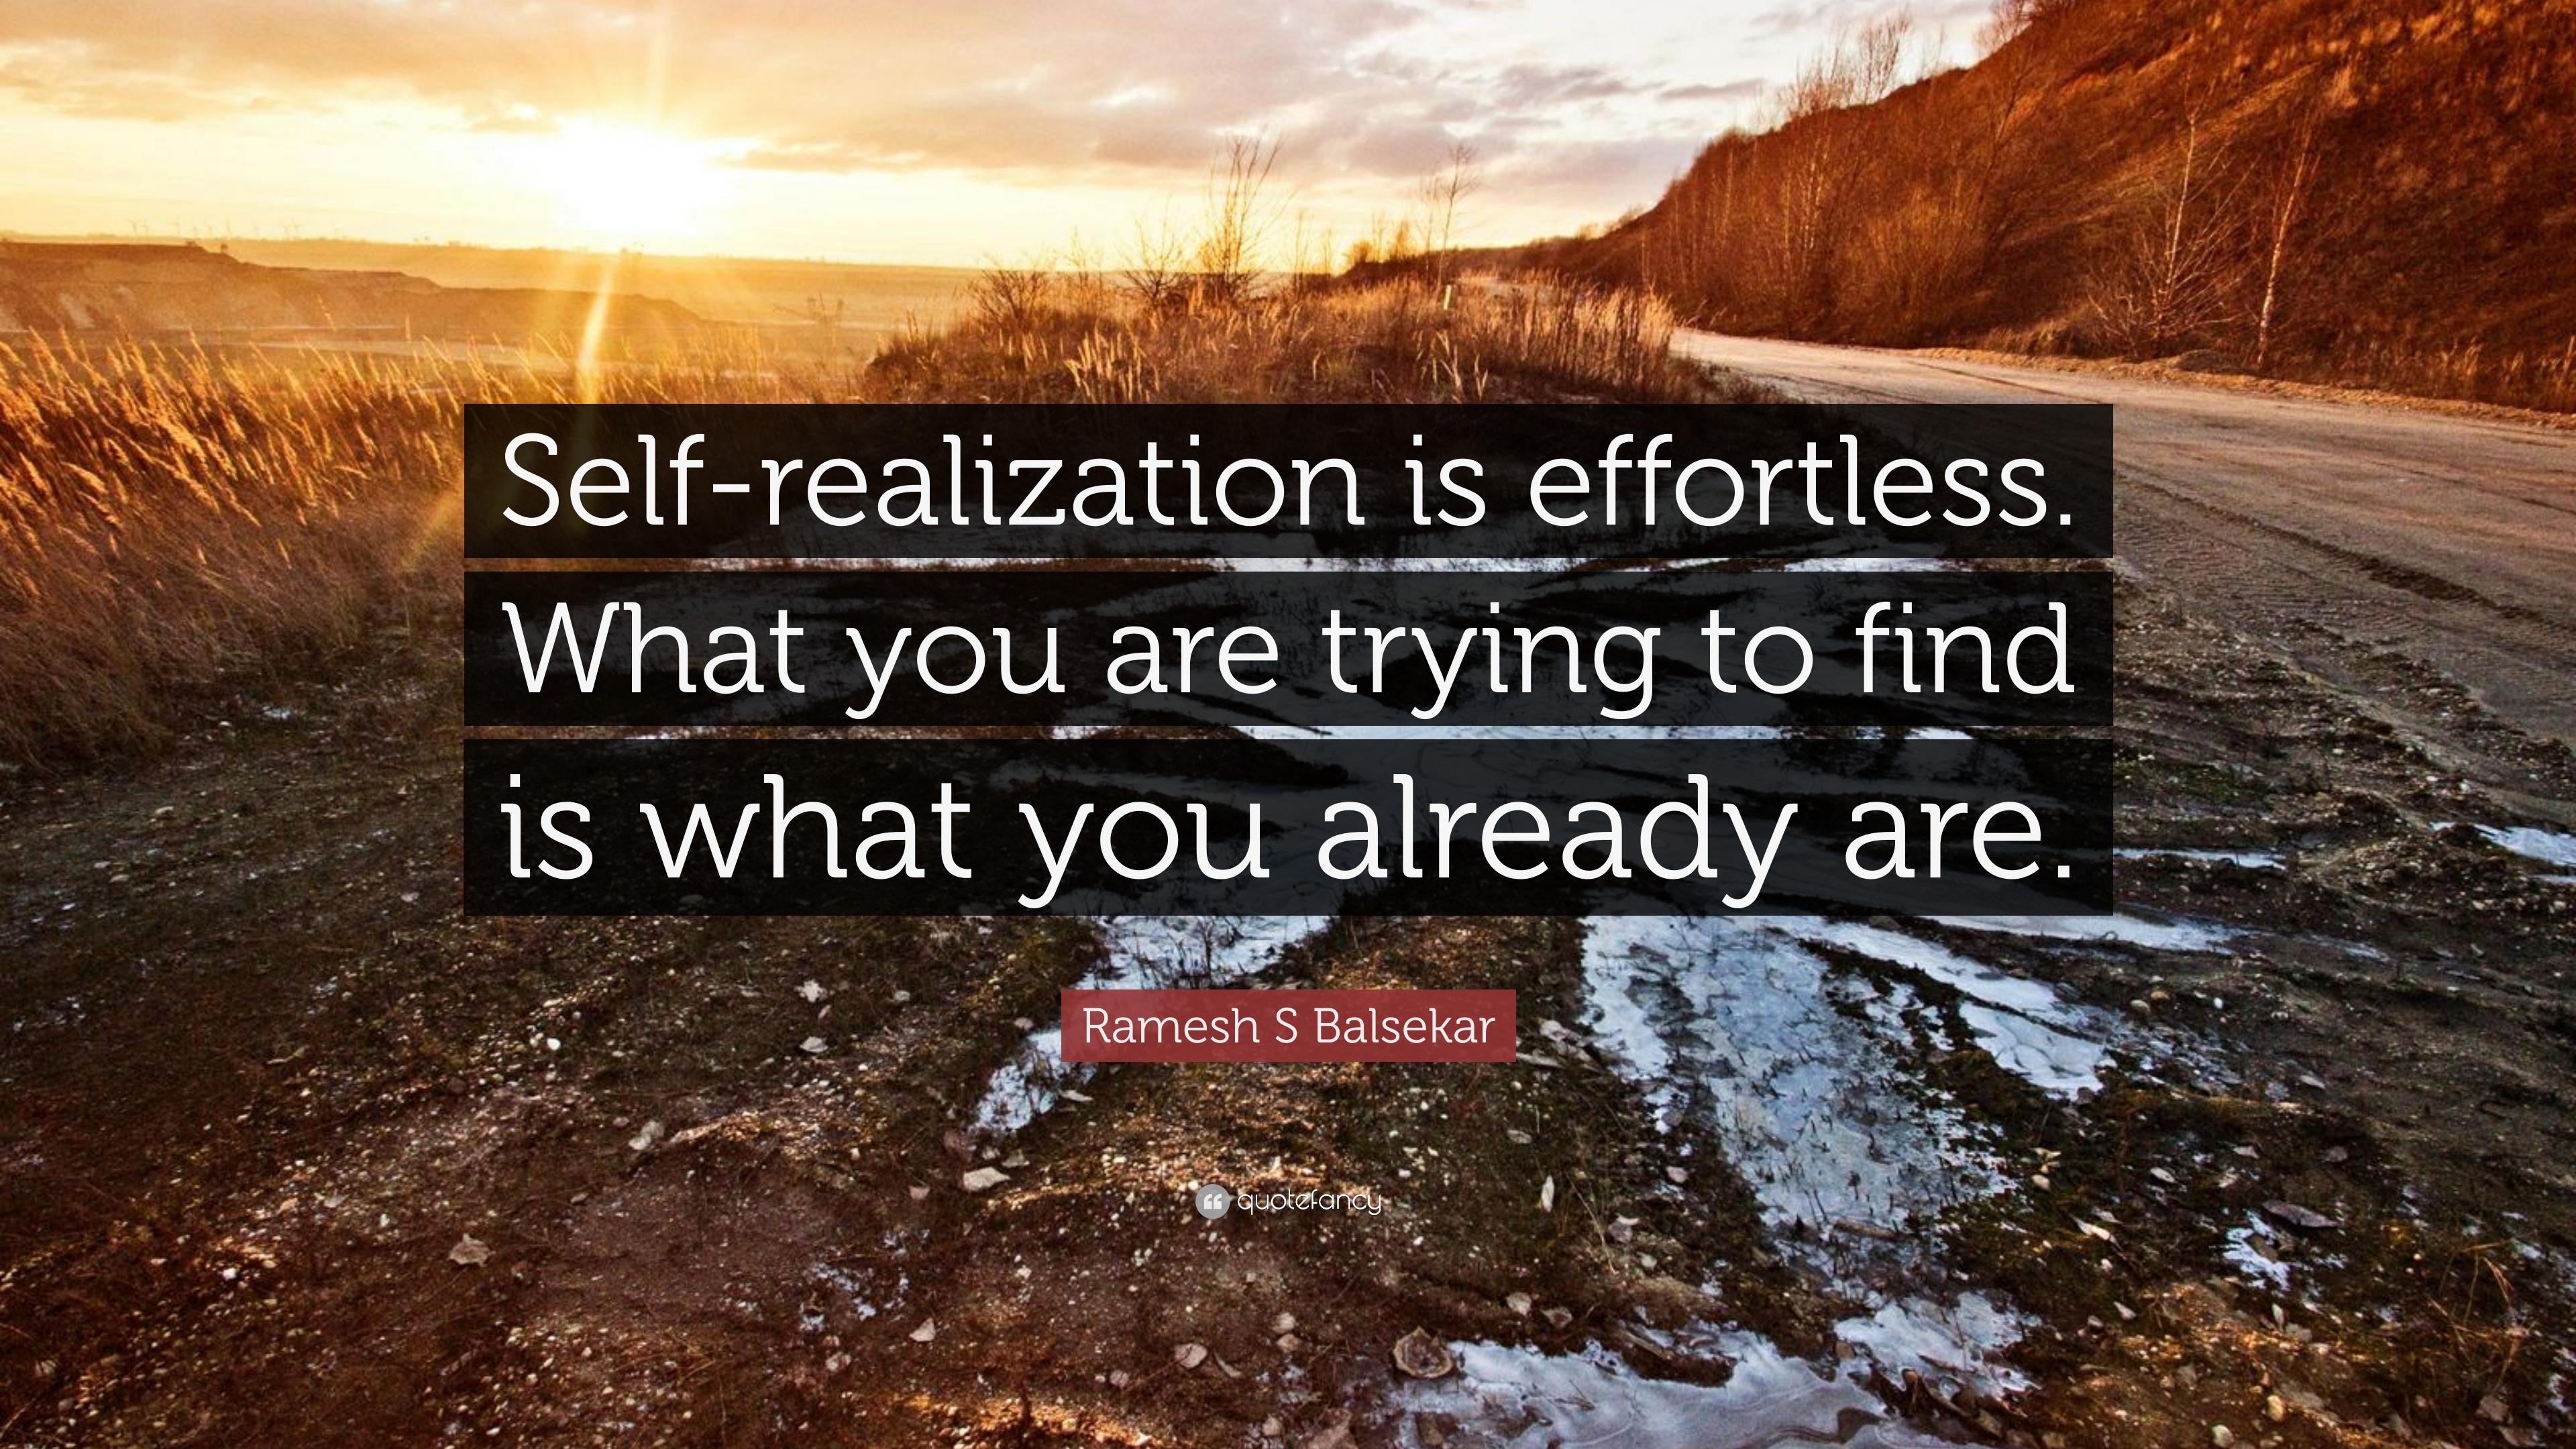 Ramesh S Balsekar Quote: “Self-realization is effortless. What you are ...